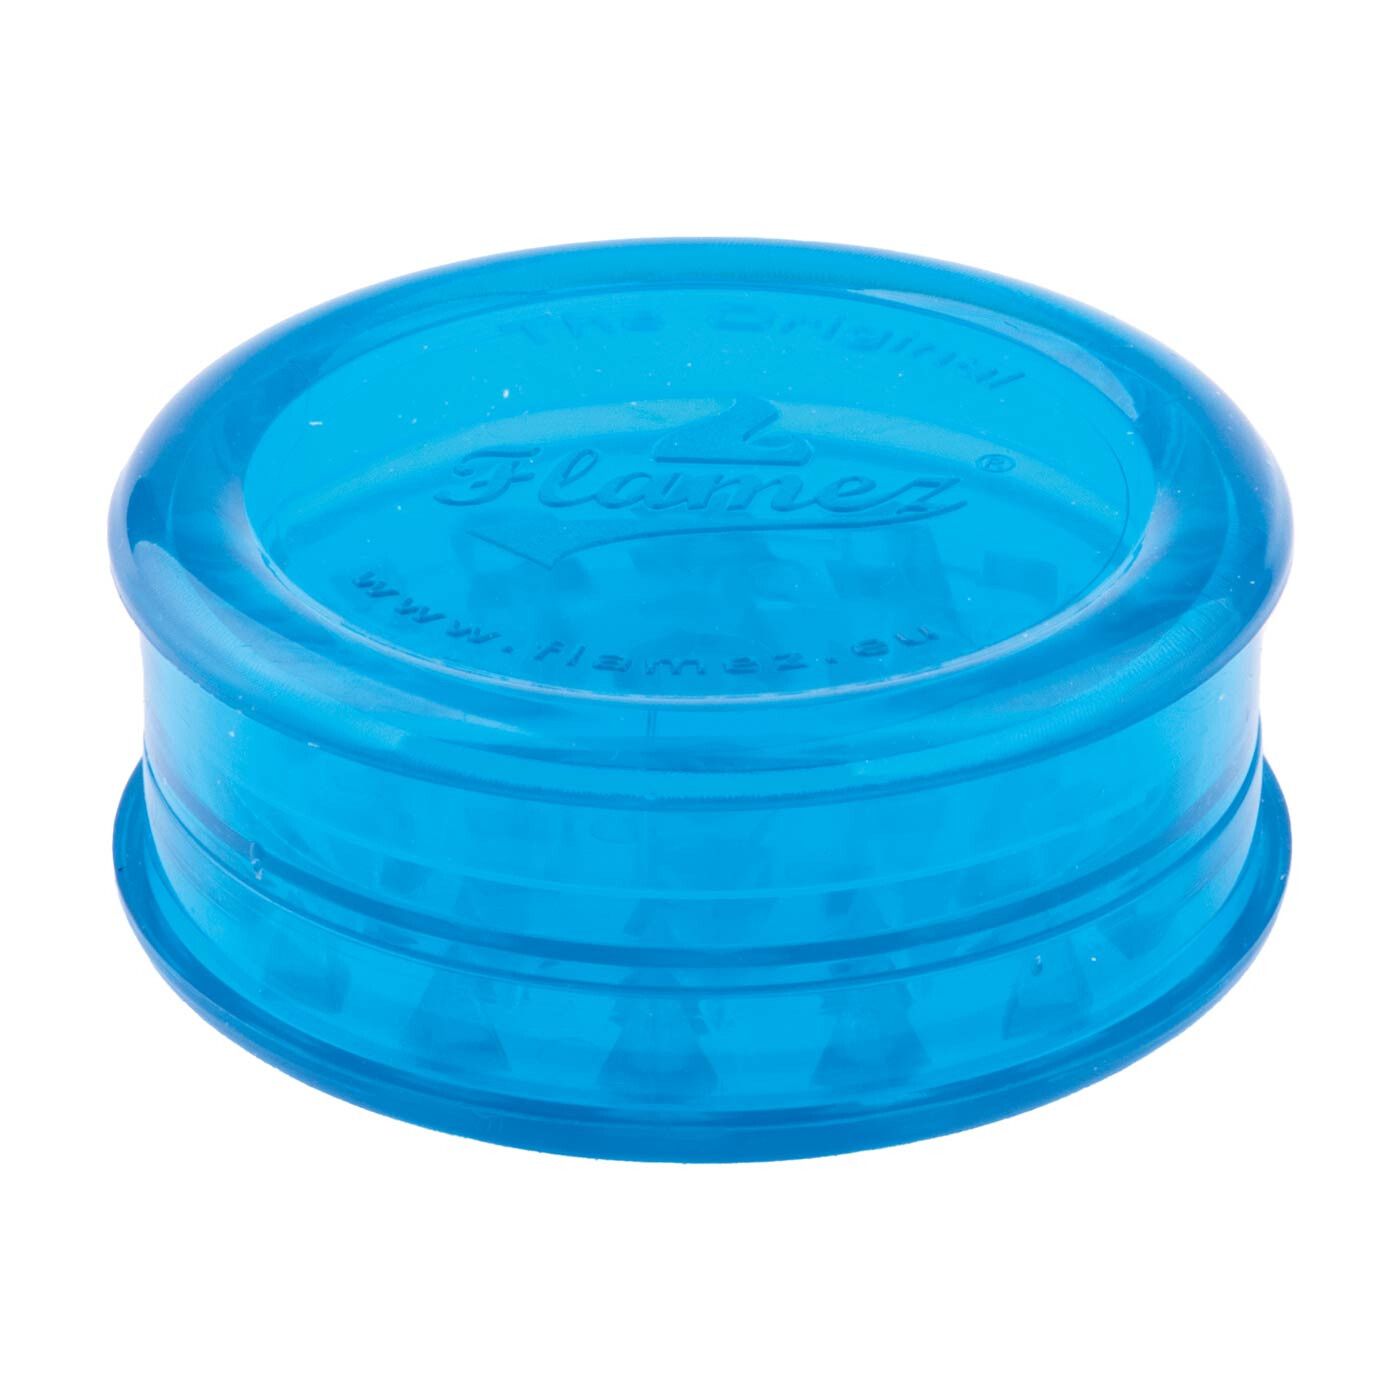 Acrylic Super Grinder With Stash Compartment Turquoise